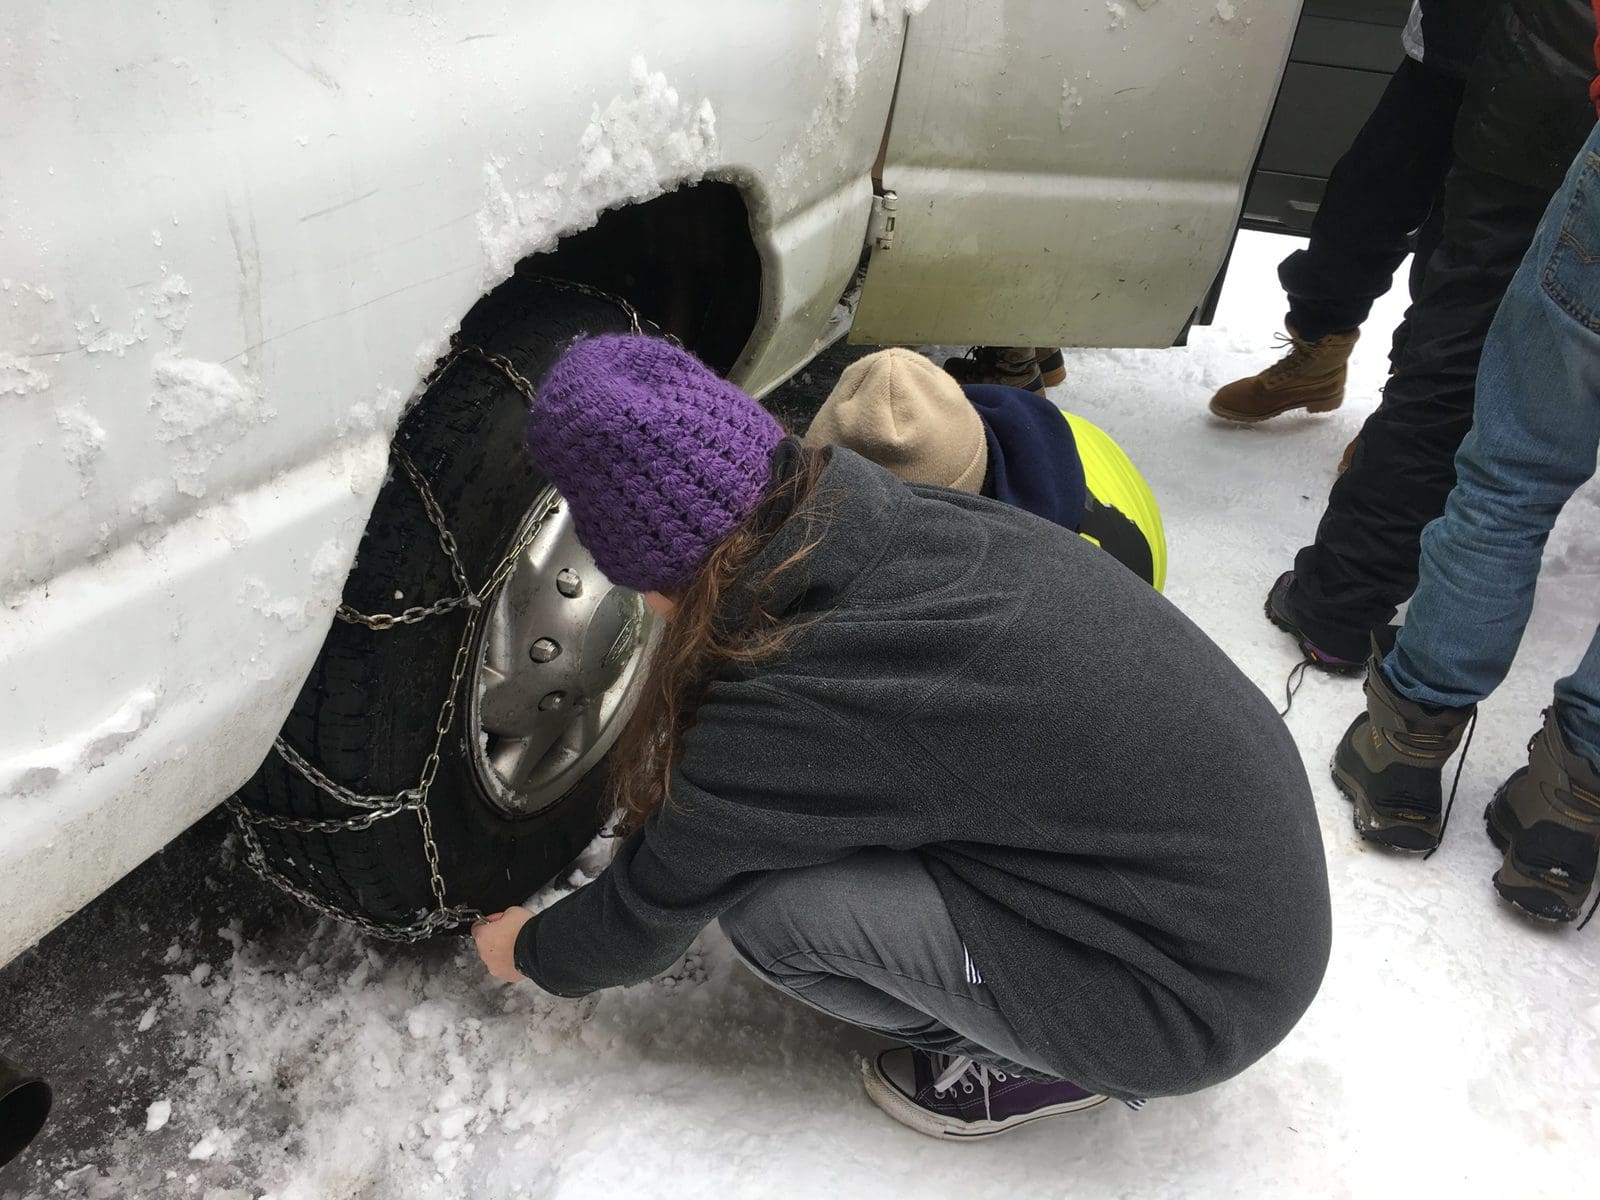 Safety first! All the Tivnuniks learned how to put chains on the van's tires so we could navigate safely through the snow.